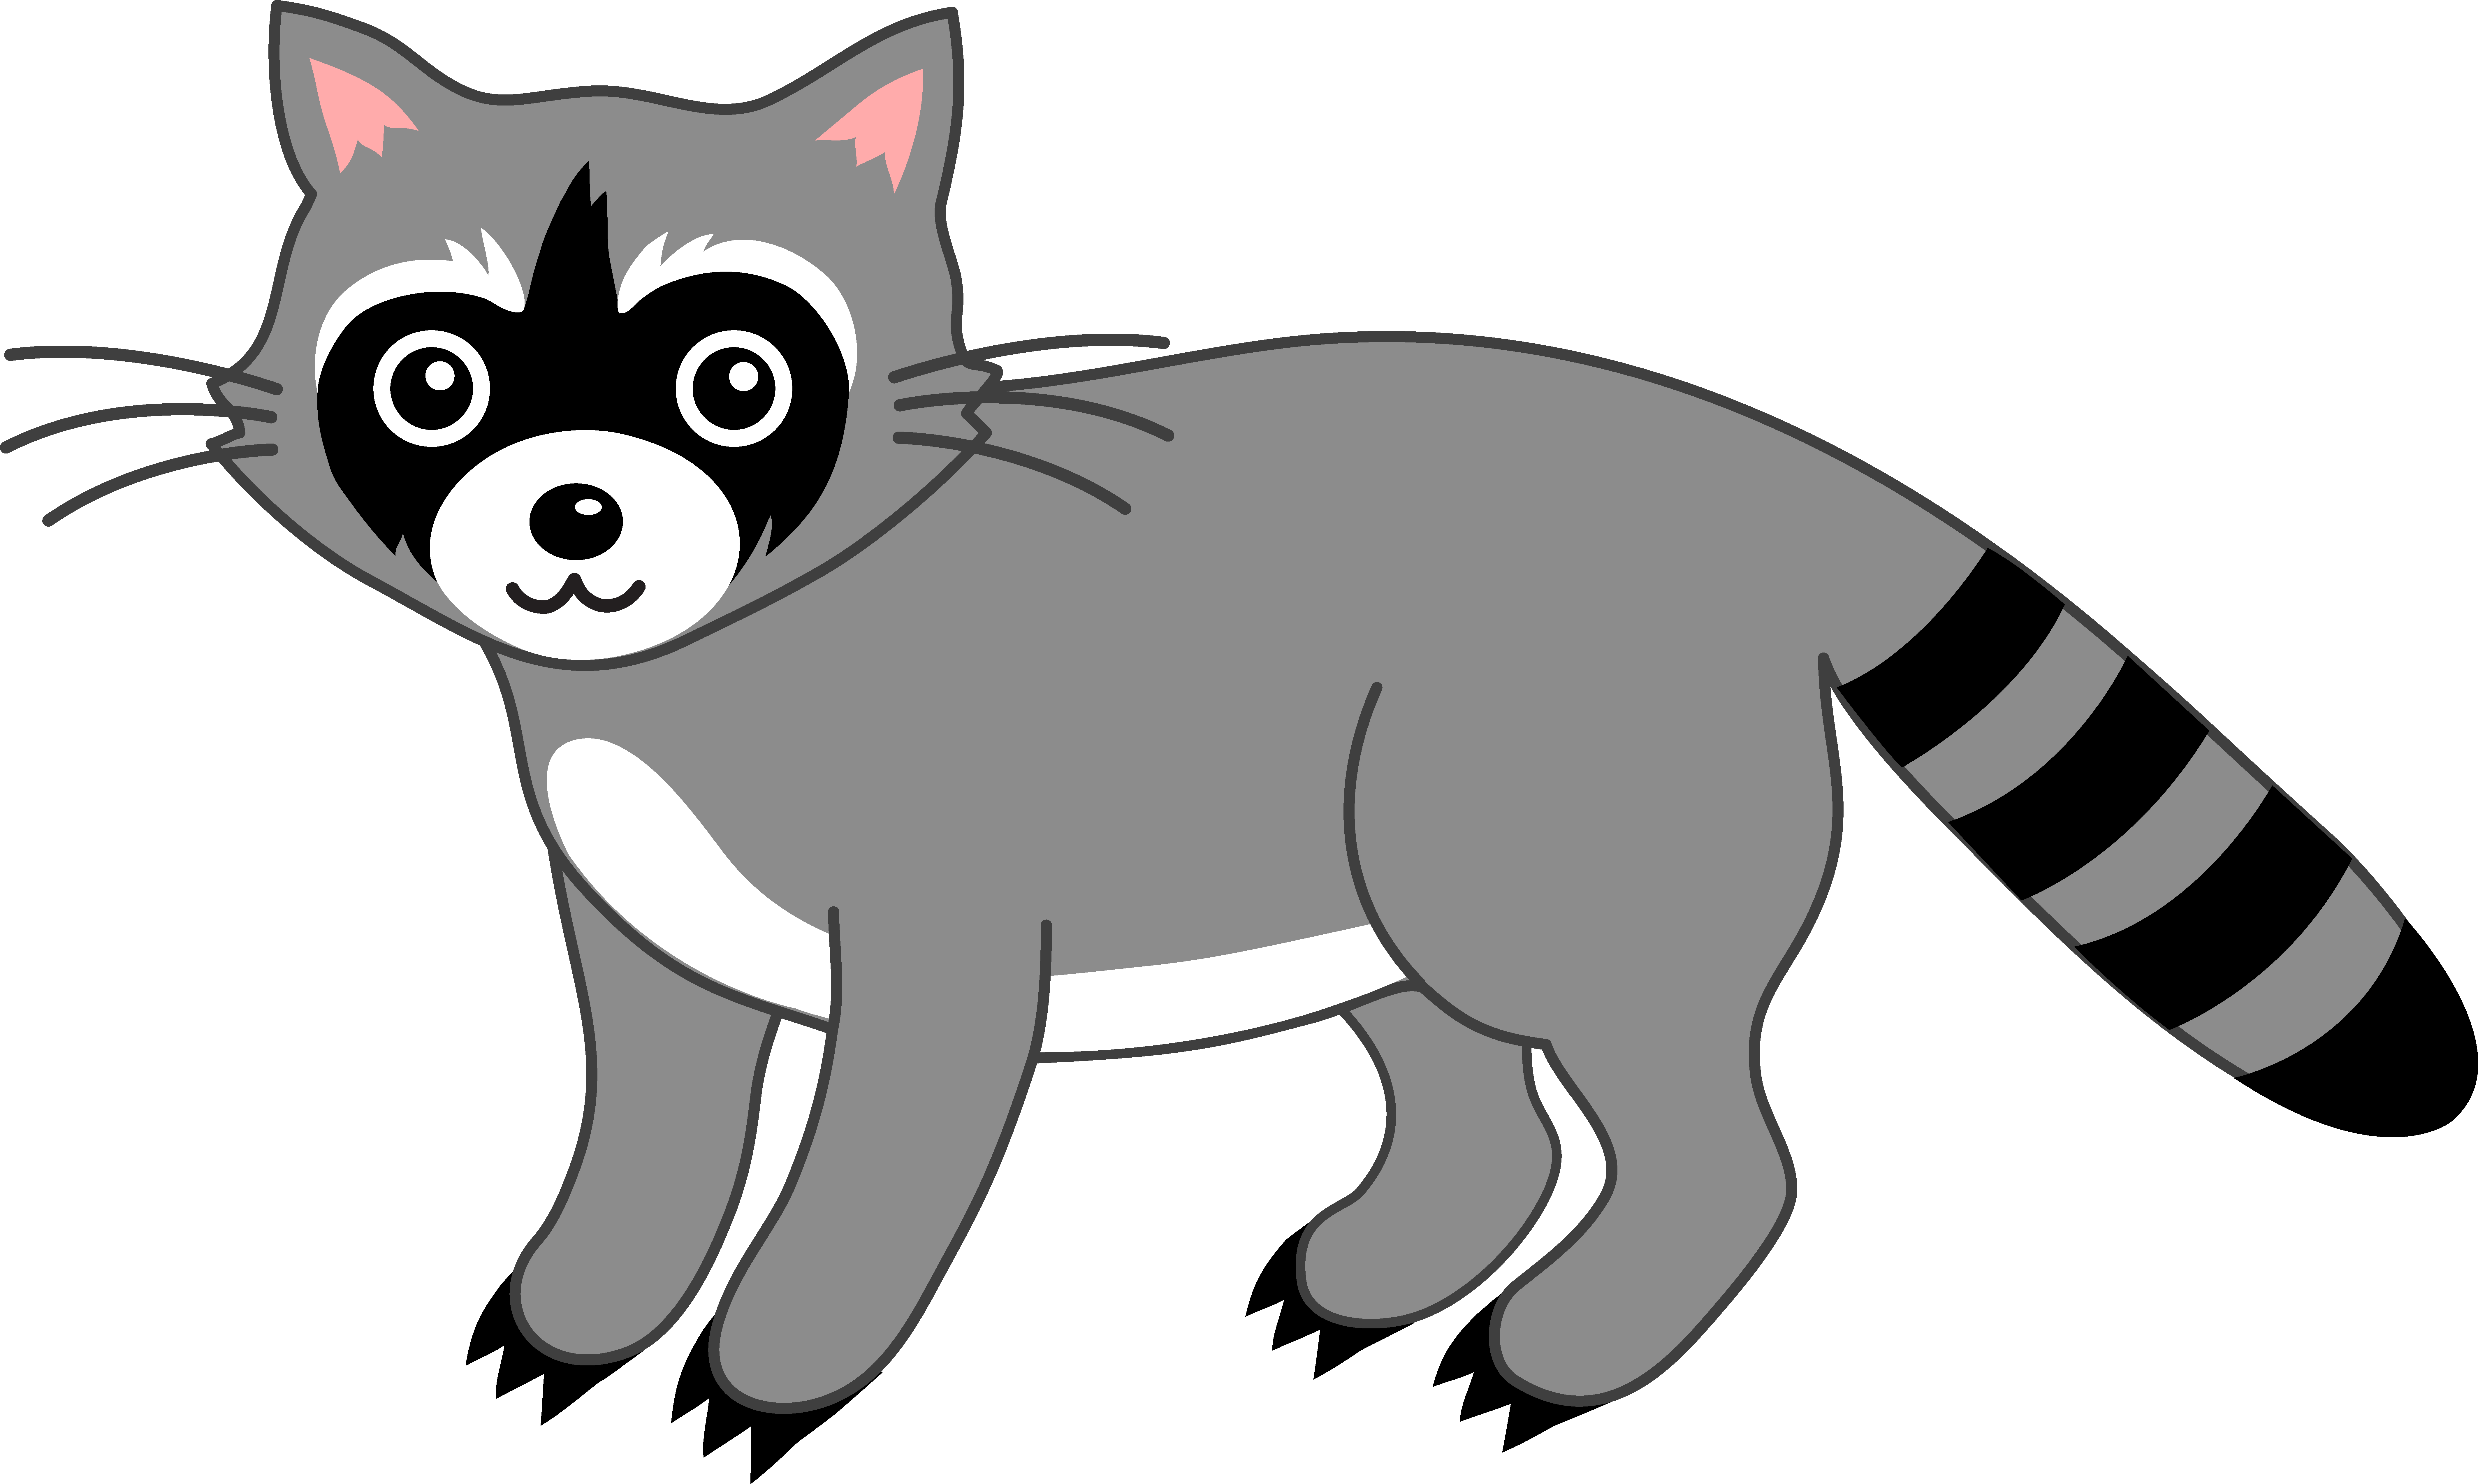 Racoon clipart #12, Download drawings